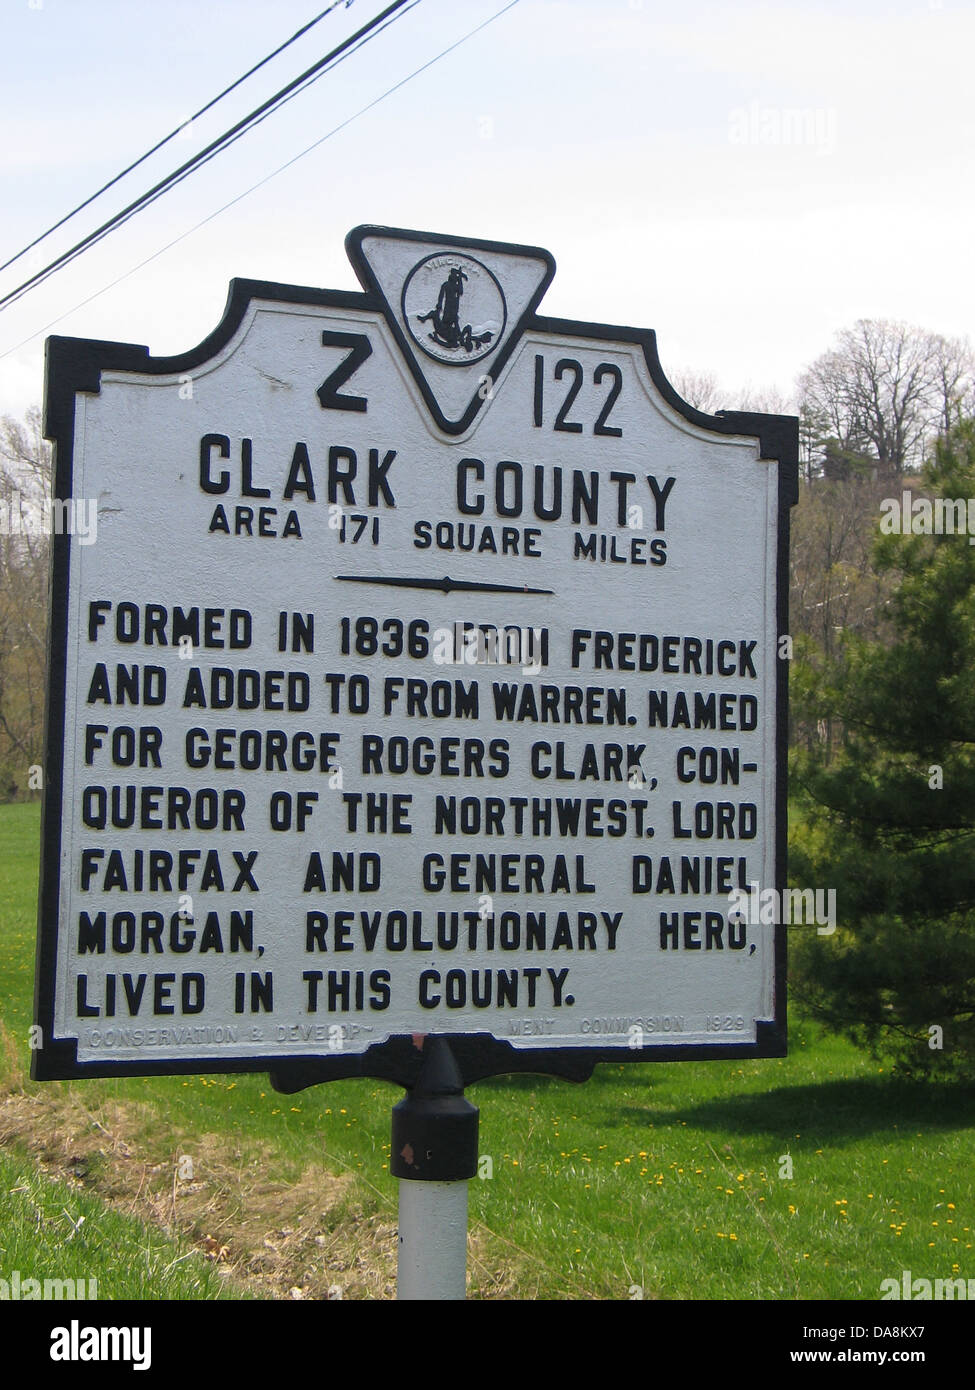 CLARKE COUNTY Area 171 Square Miles Formed in 1836 from Frederick and added to from Warren. Name for George Rogers Clark, Conqueror of the Northwest. Lord Fairfax and General Daniel Morgan, Revolutionary hero, lived in this county. Conservation & Development Commission, 1929. Stock Photo